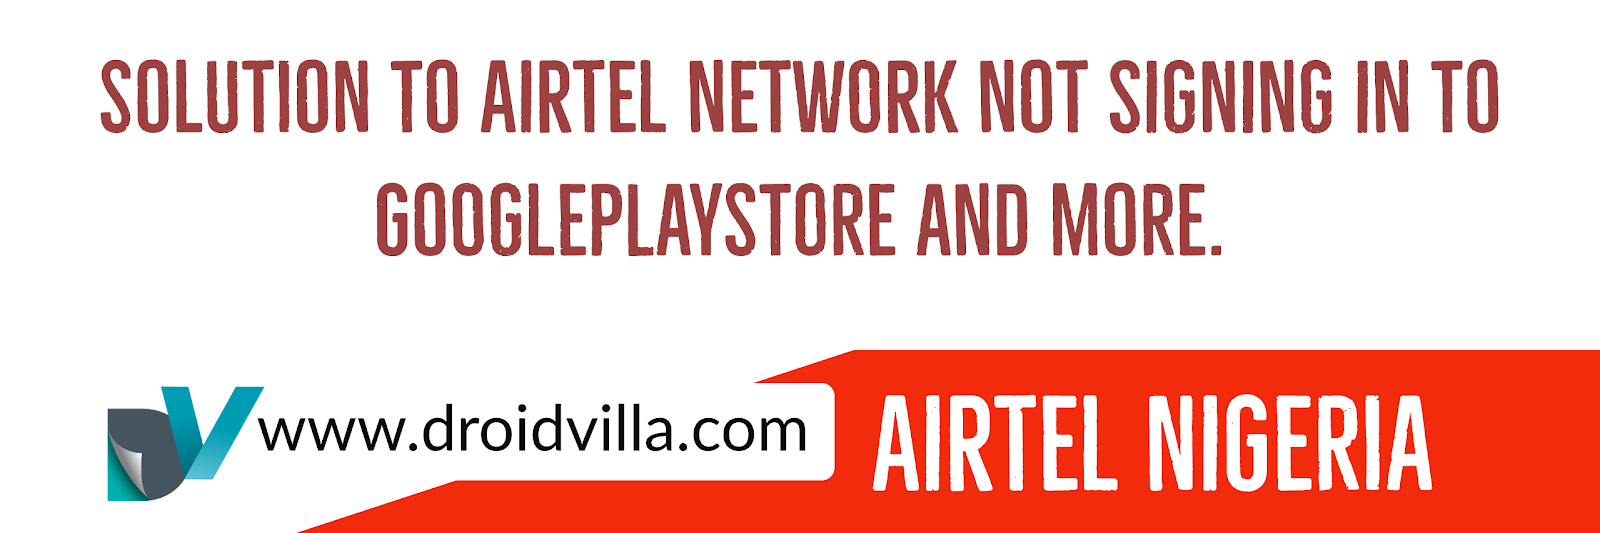 Solution to Airtel network not opening Googleplaystore